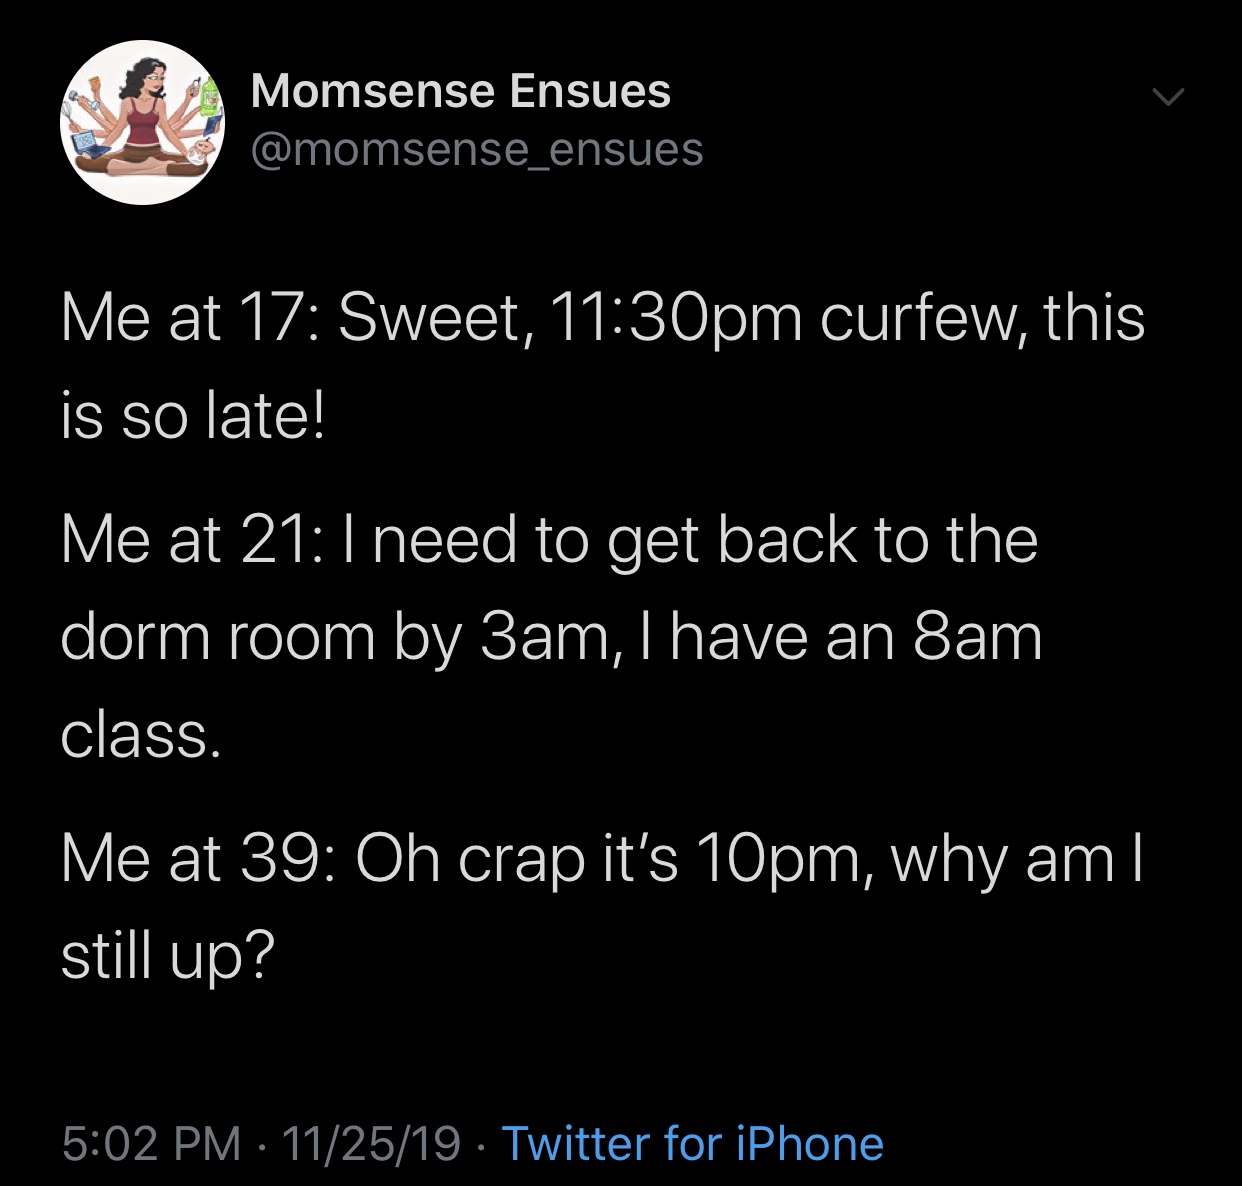 meme - atmosphere - Momsense Ensues Me at 17 Sweet, pm curfew, this is so late! Me at 21 I need to get back to the dorm room by 3am, I have an 8am class. Me at 39 Oh crap it's 10pm, why am || still up? 112519. Twitter for iPhone